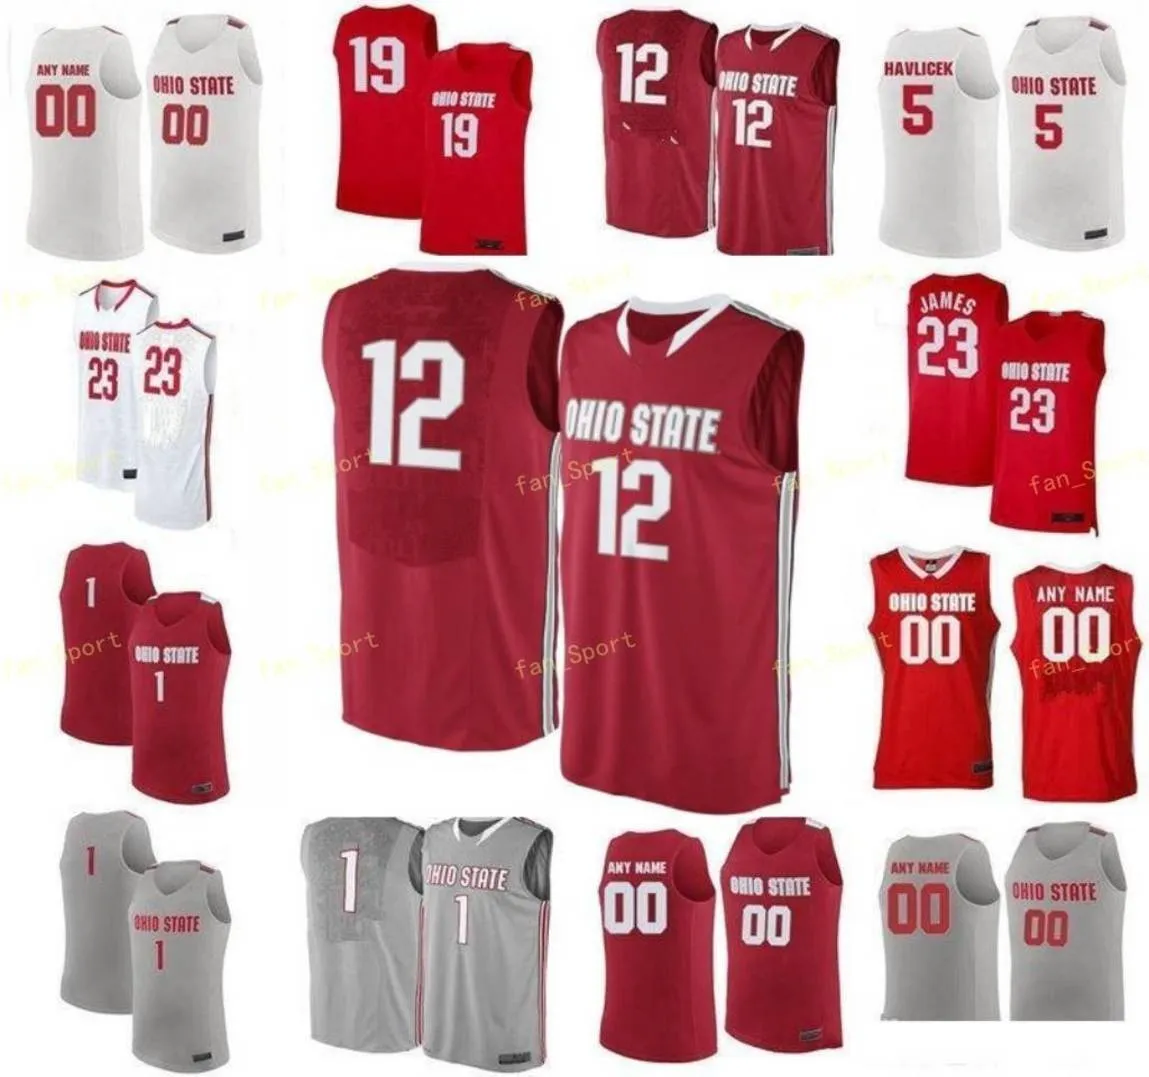 NCAA College Ohio State Buckeyes Basketball Jersey 23 James 24 Andre Wesson 25 Kyle Young 27 Fred Taylor Custom Ed